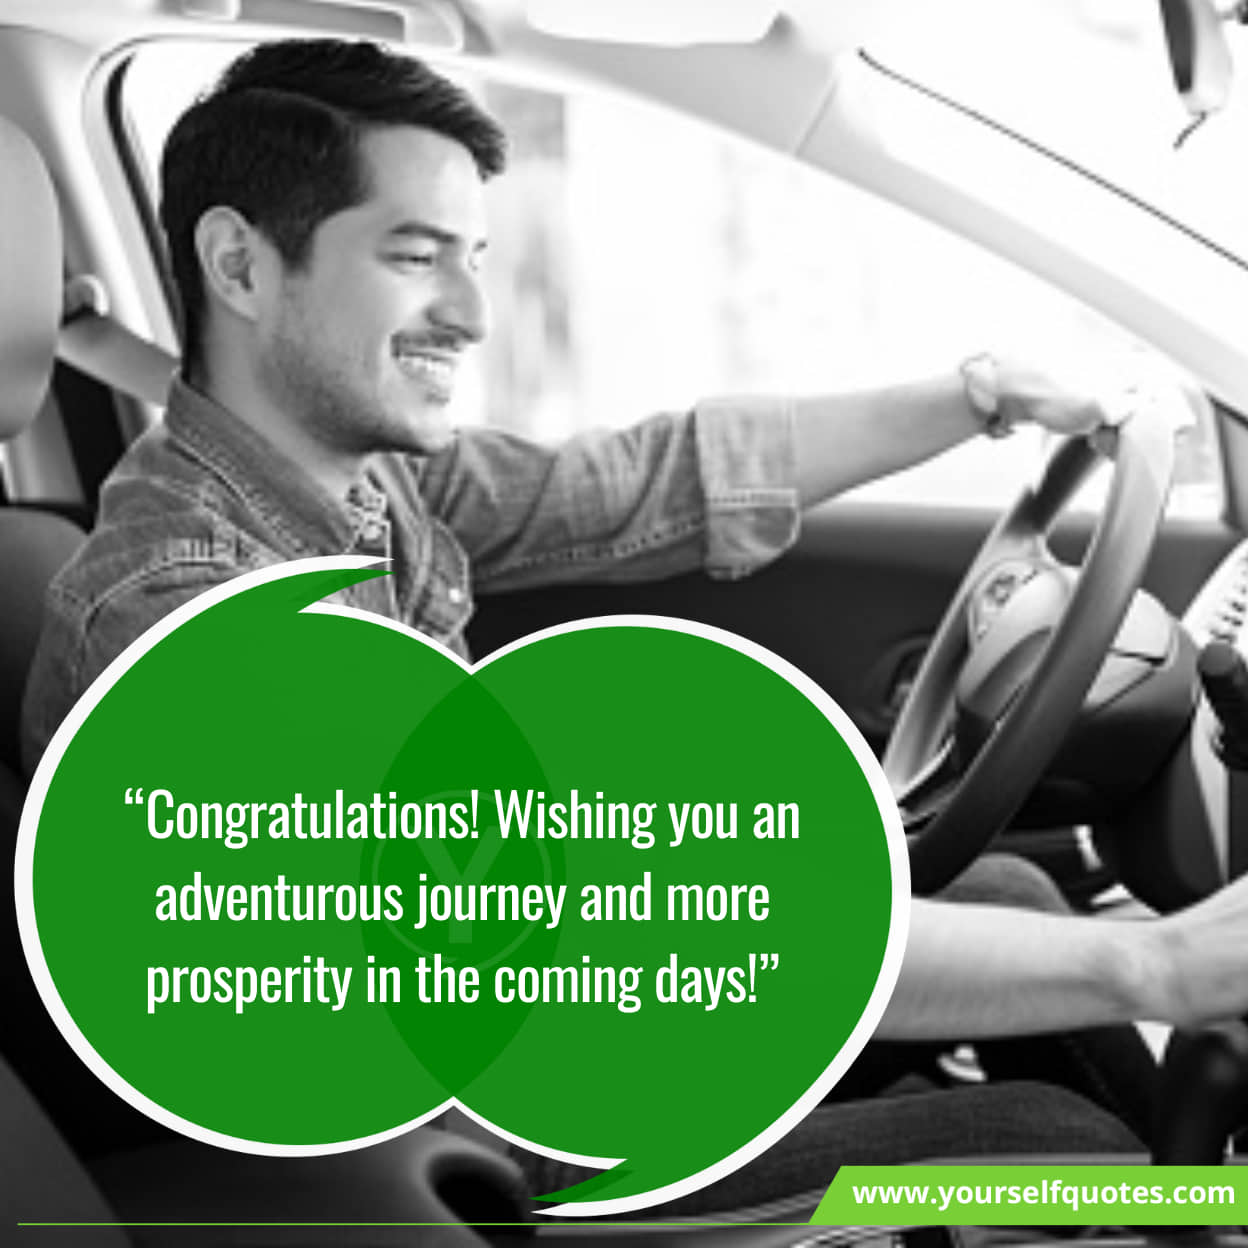 Inspiring Congrats Wishes About Buying A New Car